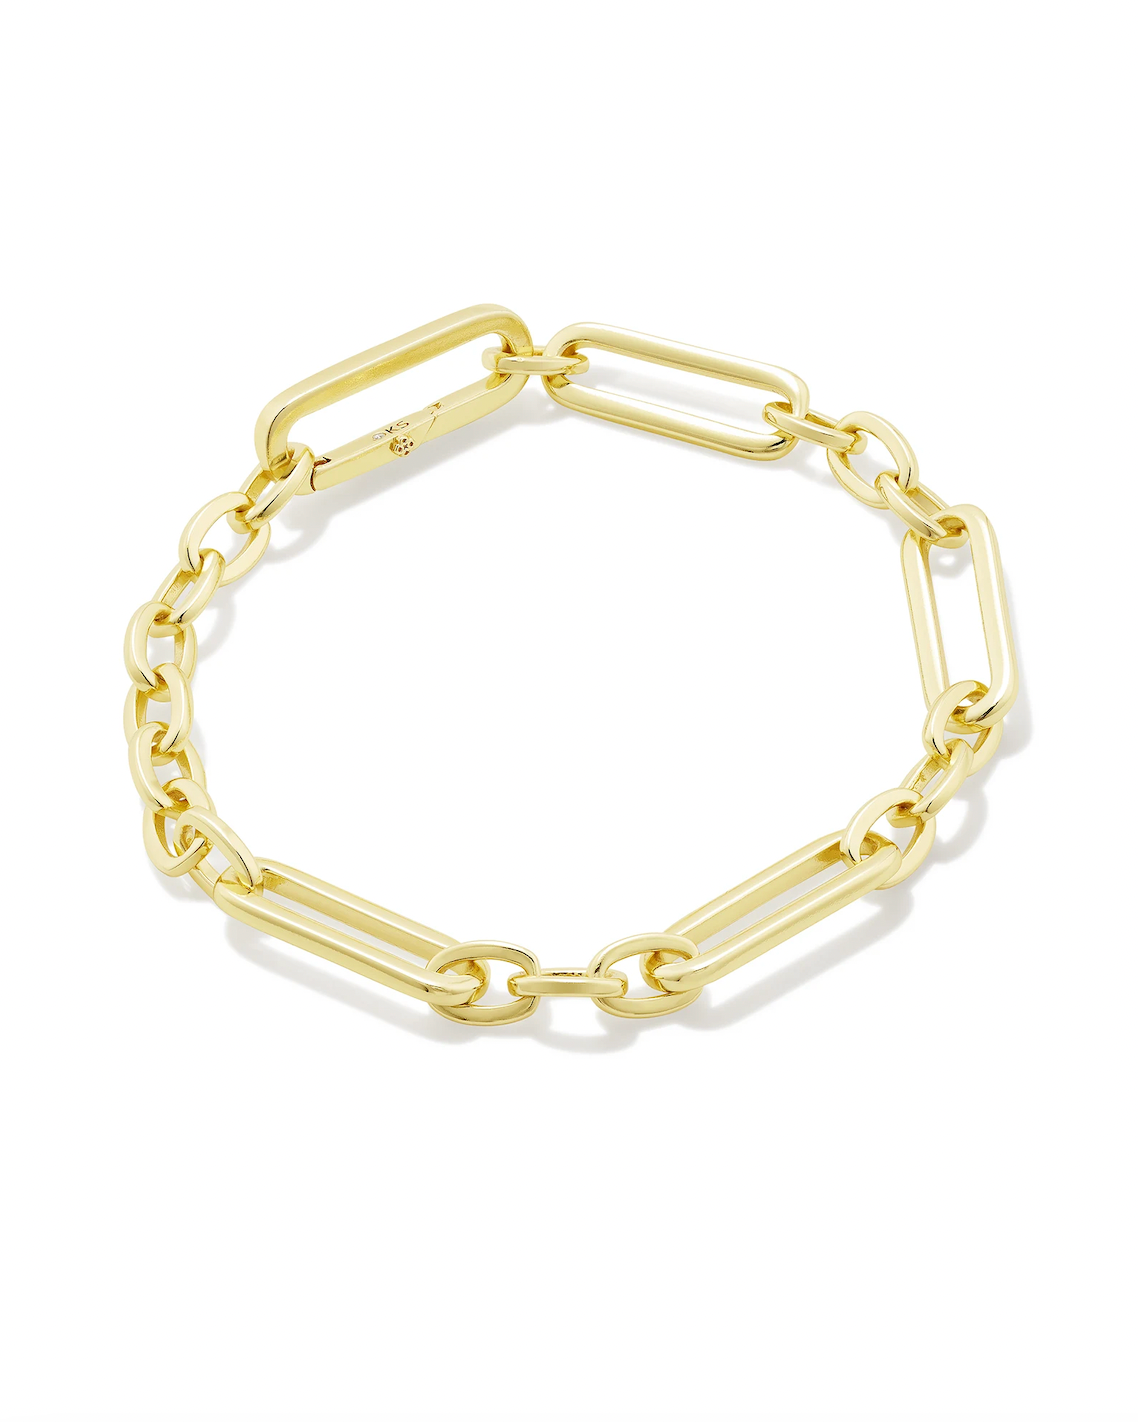 KENDRA SCOTT HEATHER LINK AND CHAIN BRACELET IN GOLD METAL